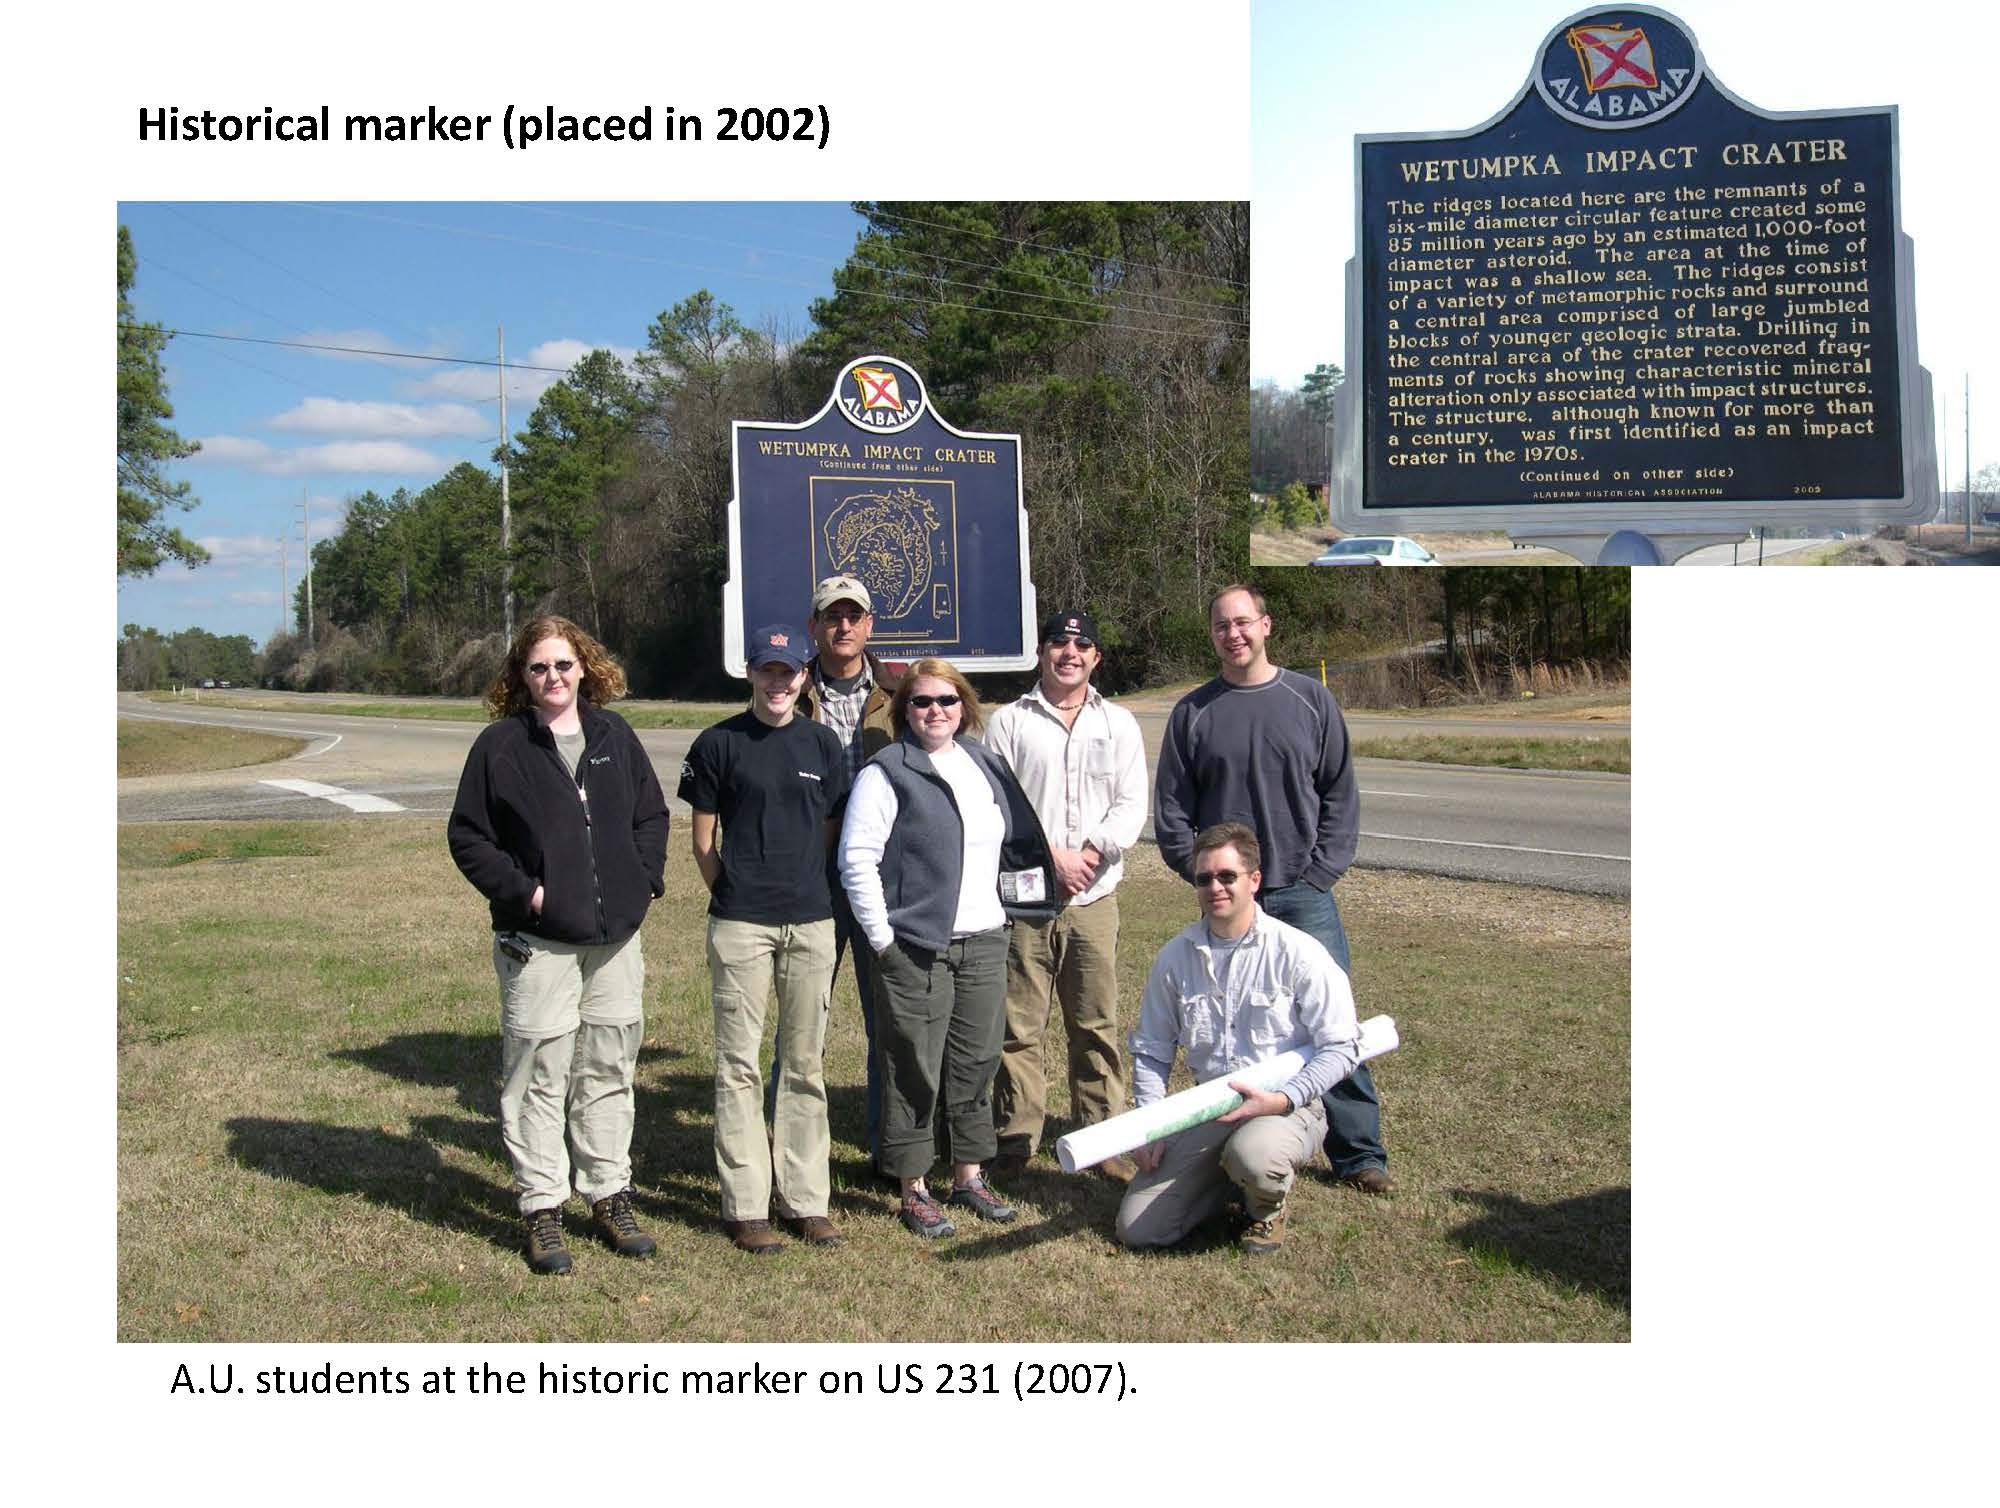 Dr. Kin'gs group in front of the Wetumpka Impact Crater historic marker